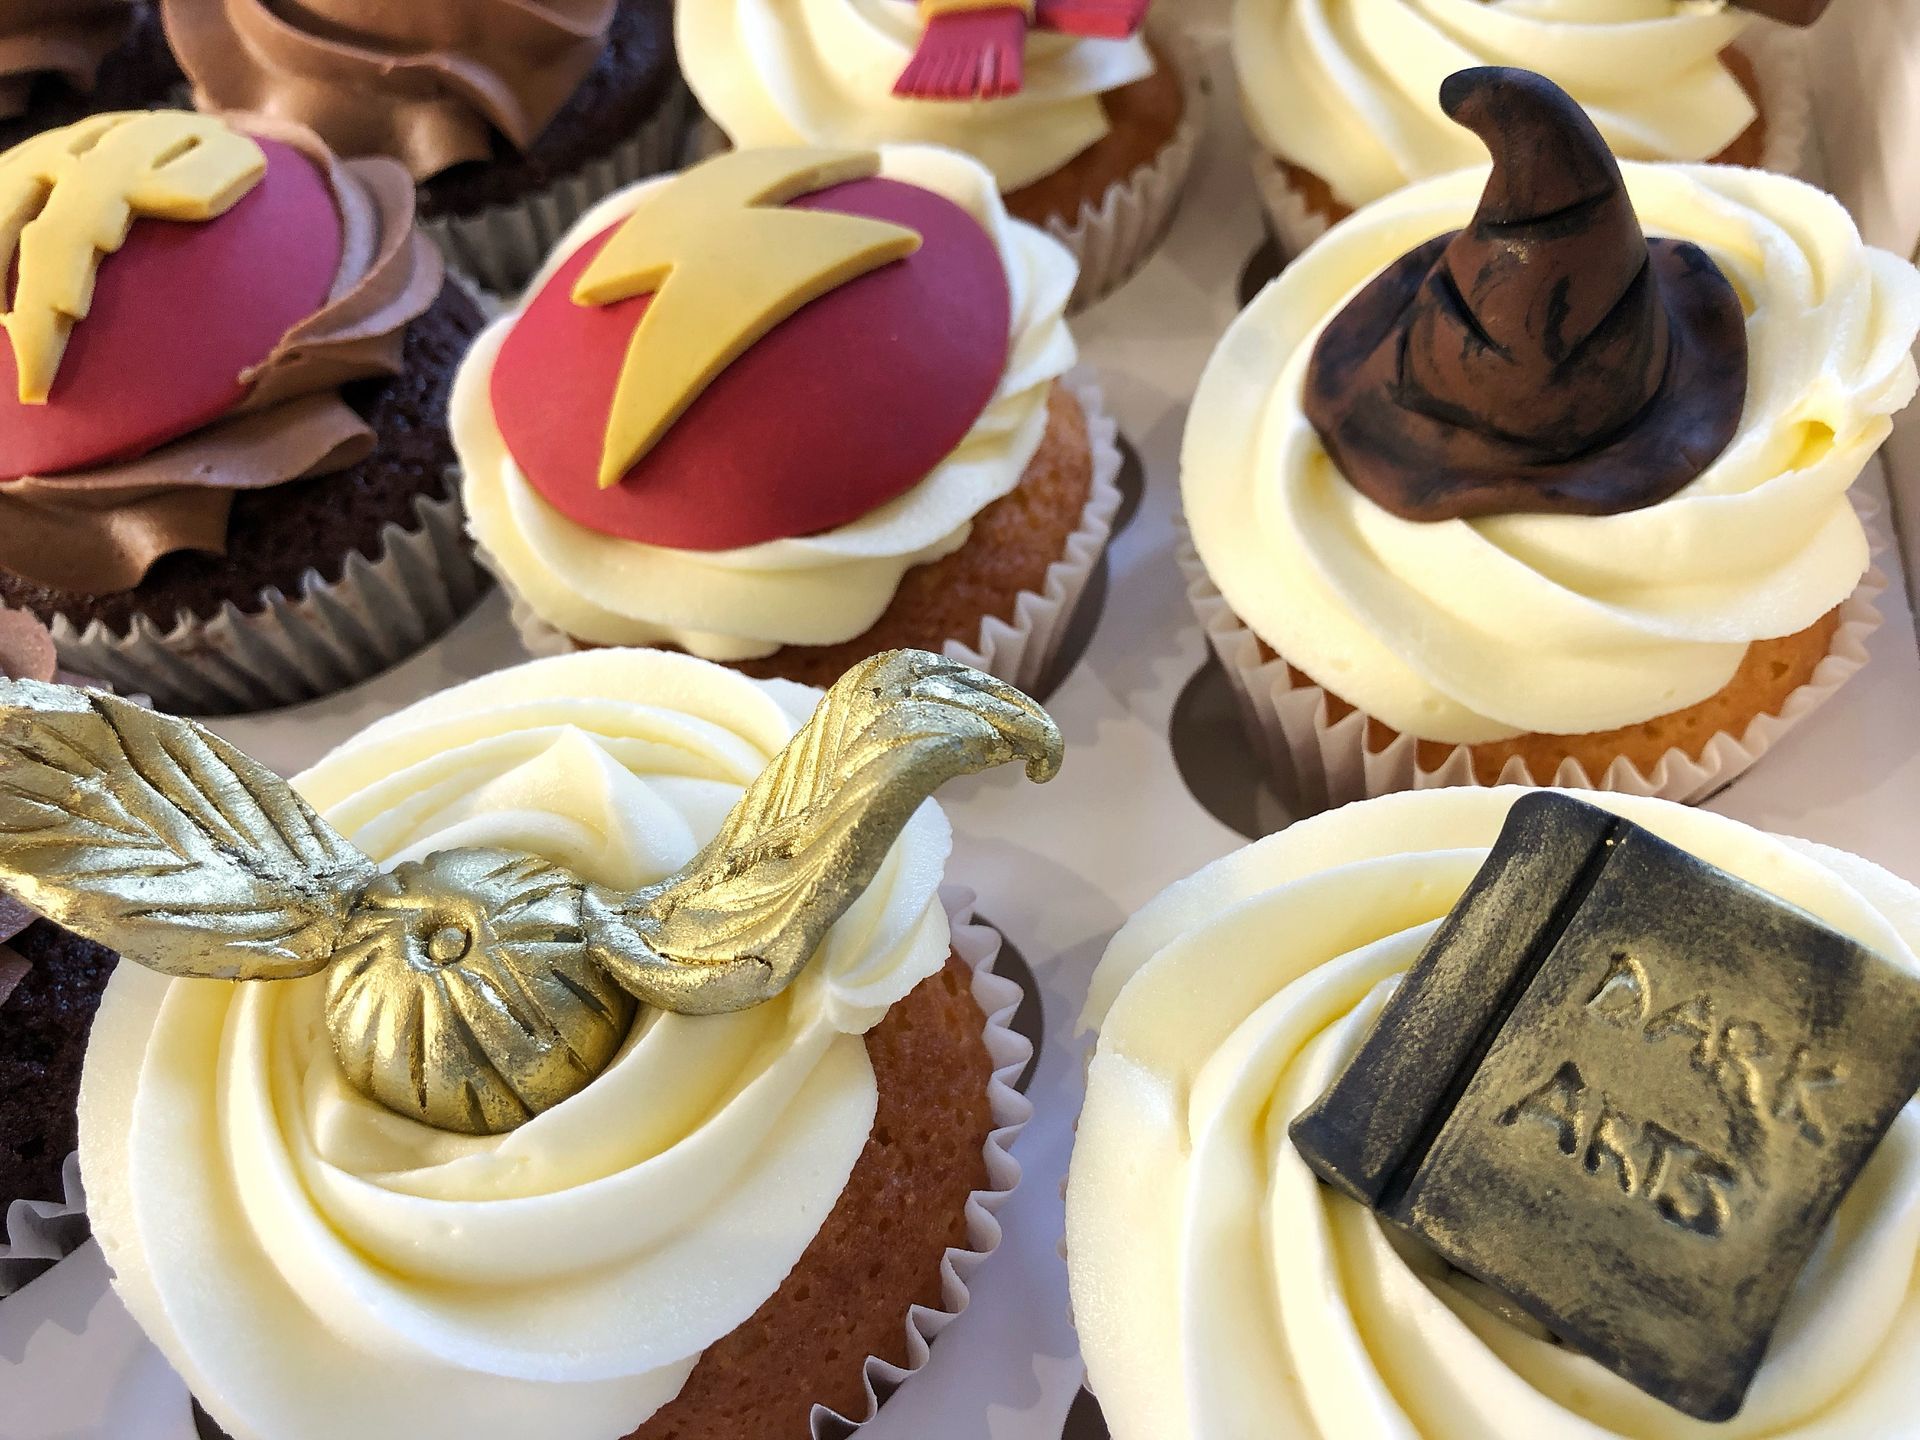 Harry Potter themed cupcakes with fondant witches hats, lightening bolts gold Snitches, book of spells.